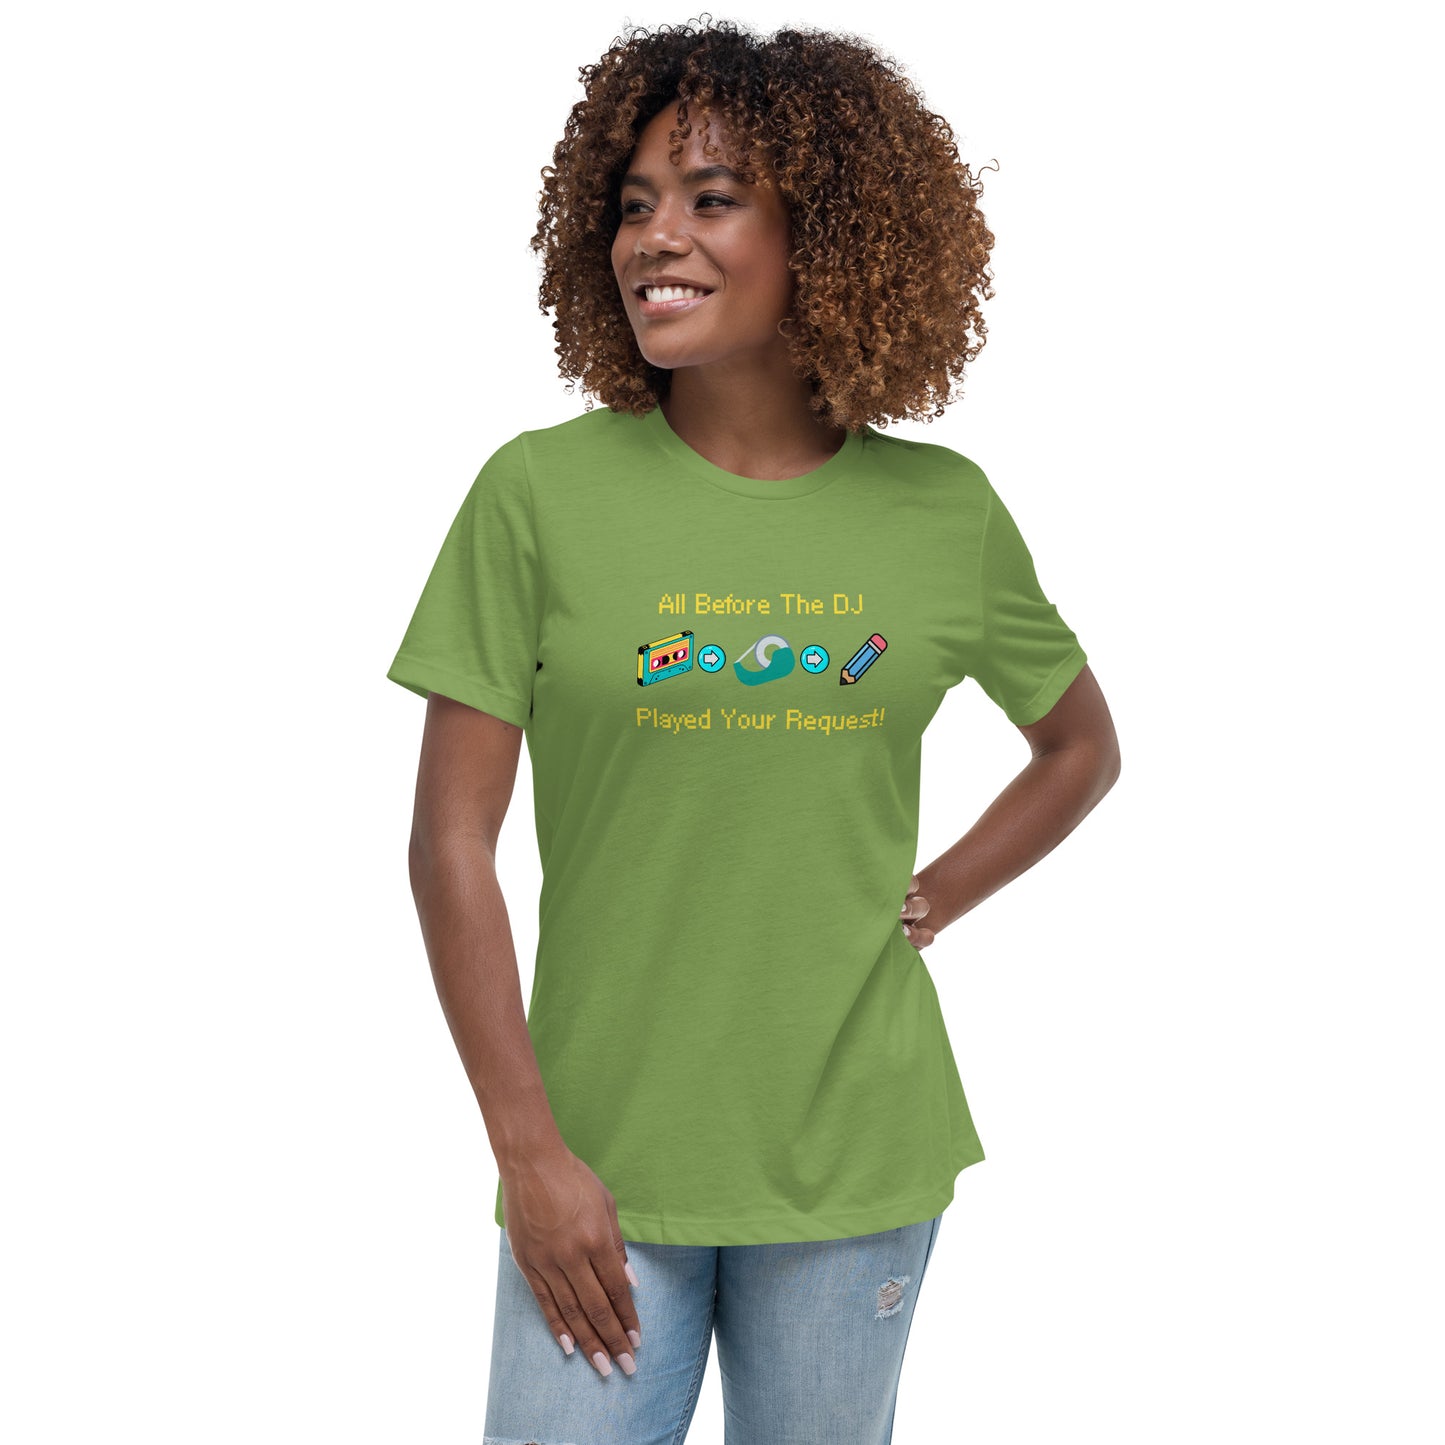 All Before The DJ Played Your Request! Women's Relaxed T-Shirt